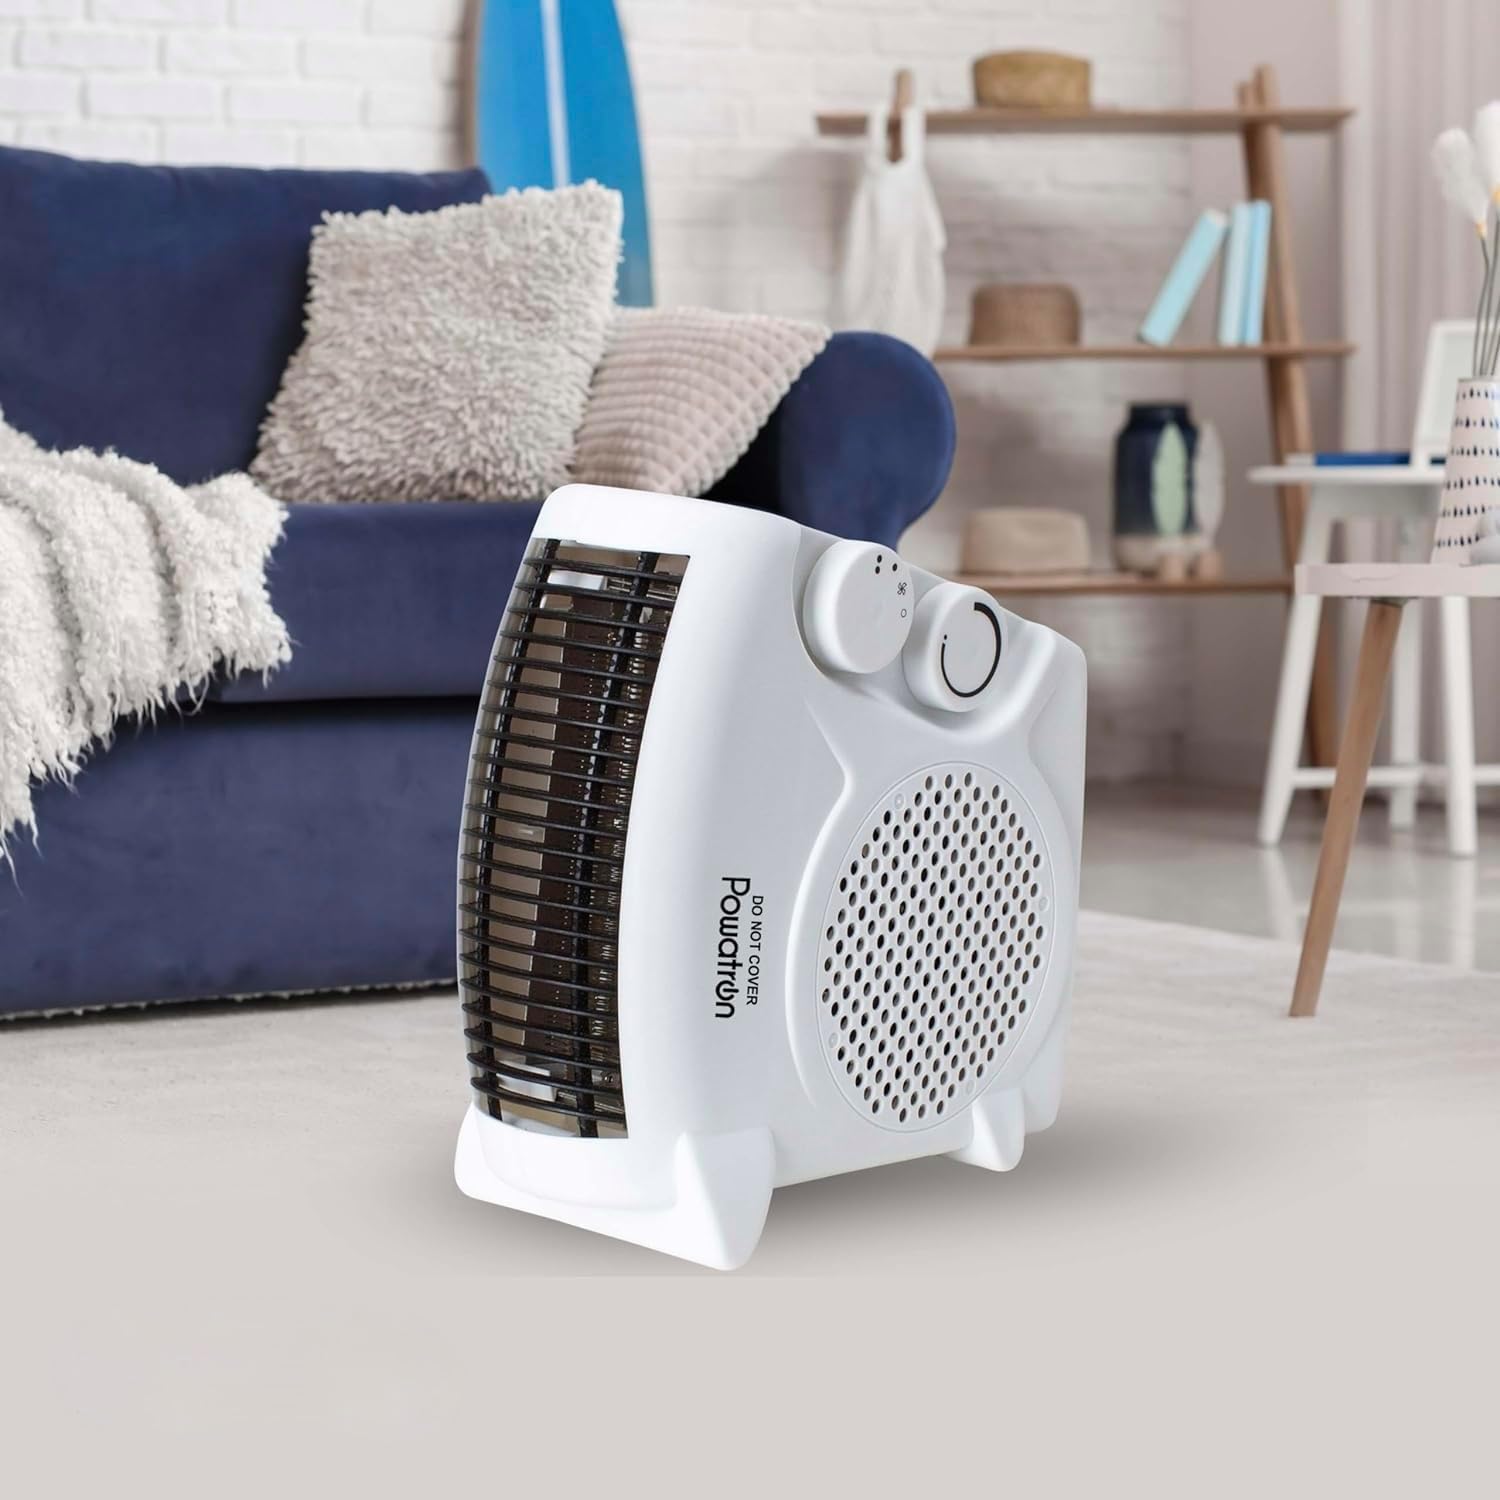 ADEPTNA Energy Efficient Electric Portable Fan Heater With 2 Heat Settings 1000/2000W Free Standing Lightweight Adjustable Thermostat & Overheat Protection Portable for Home & Office